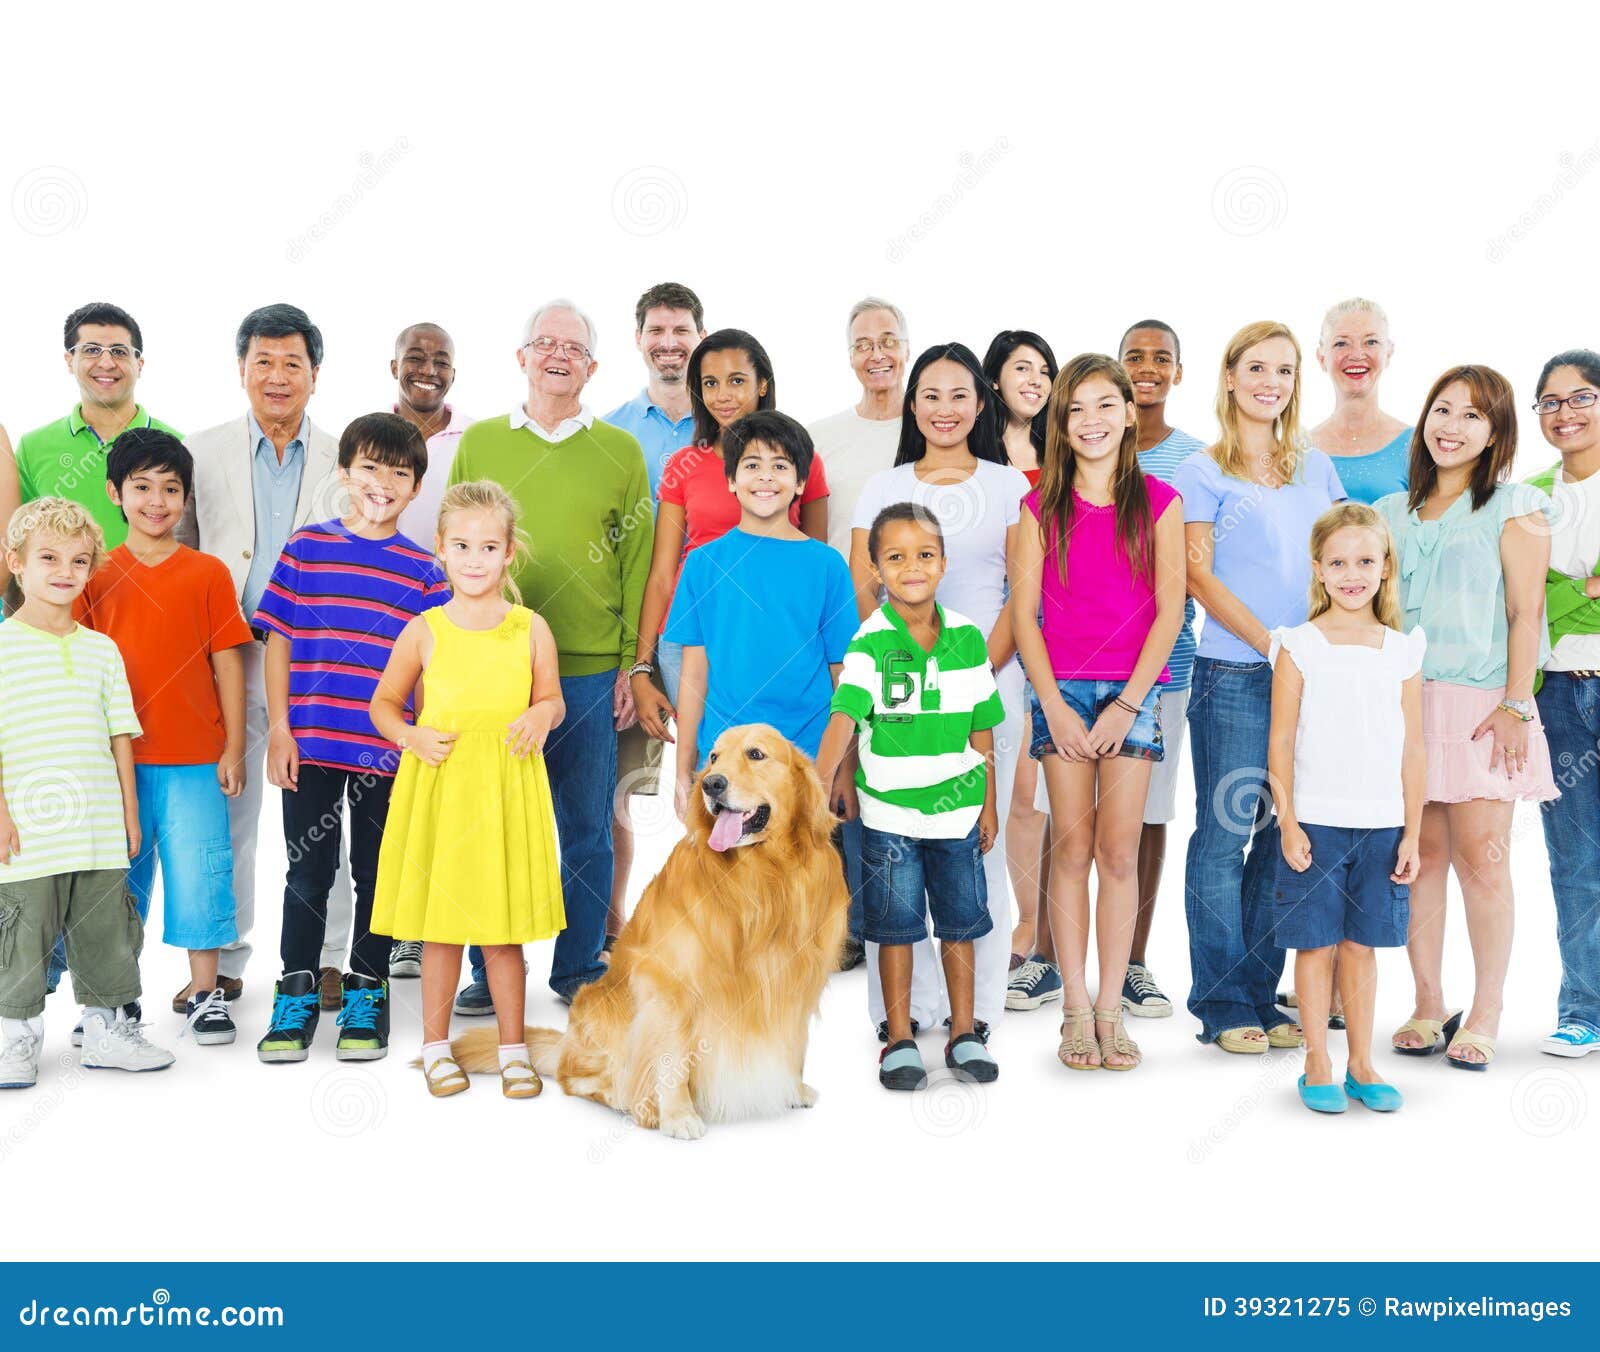 multi-ethnic group of mixed age people